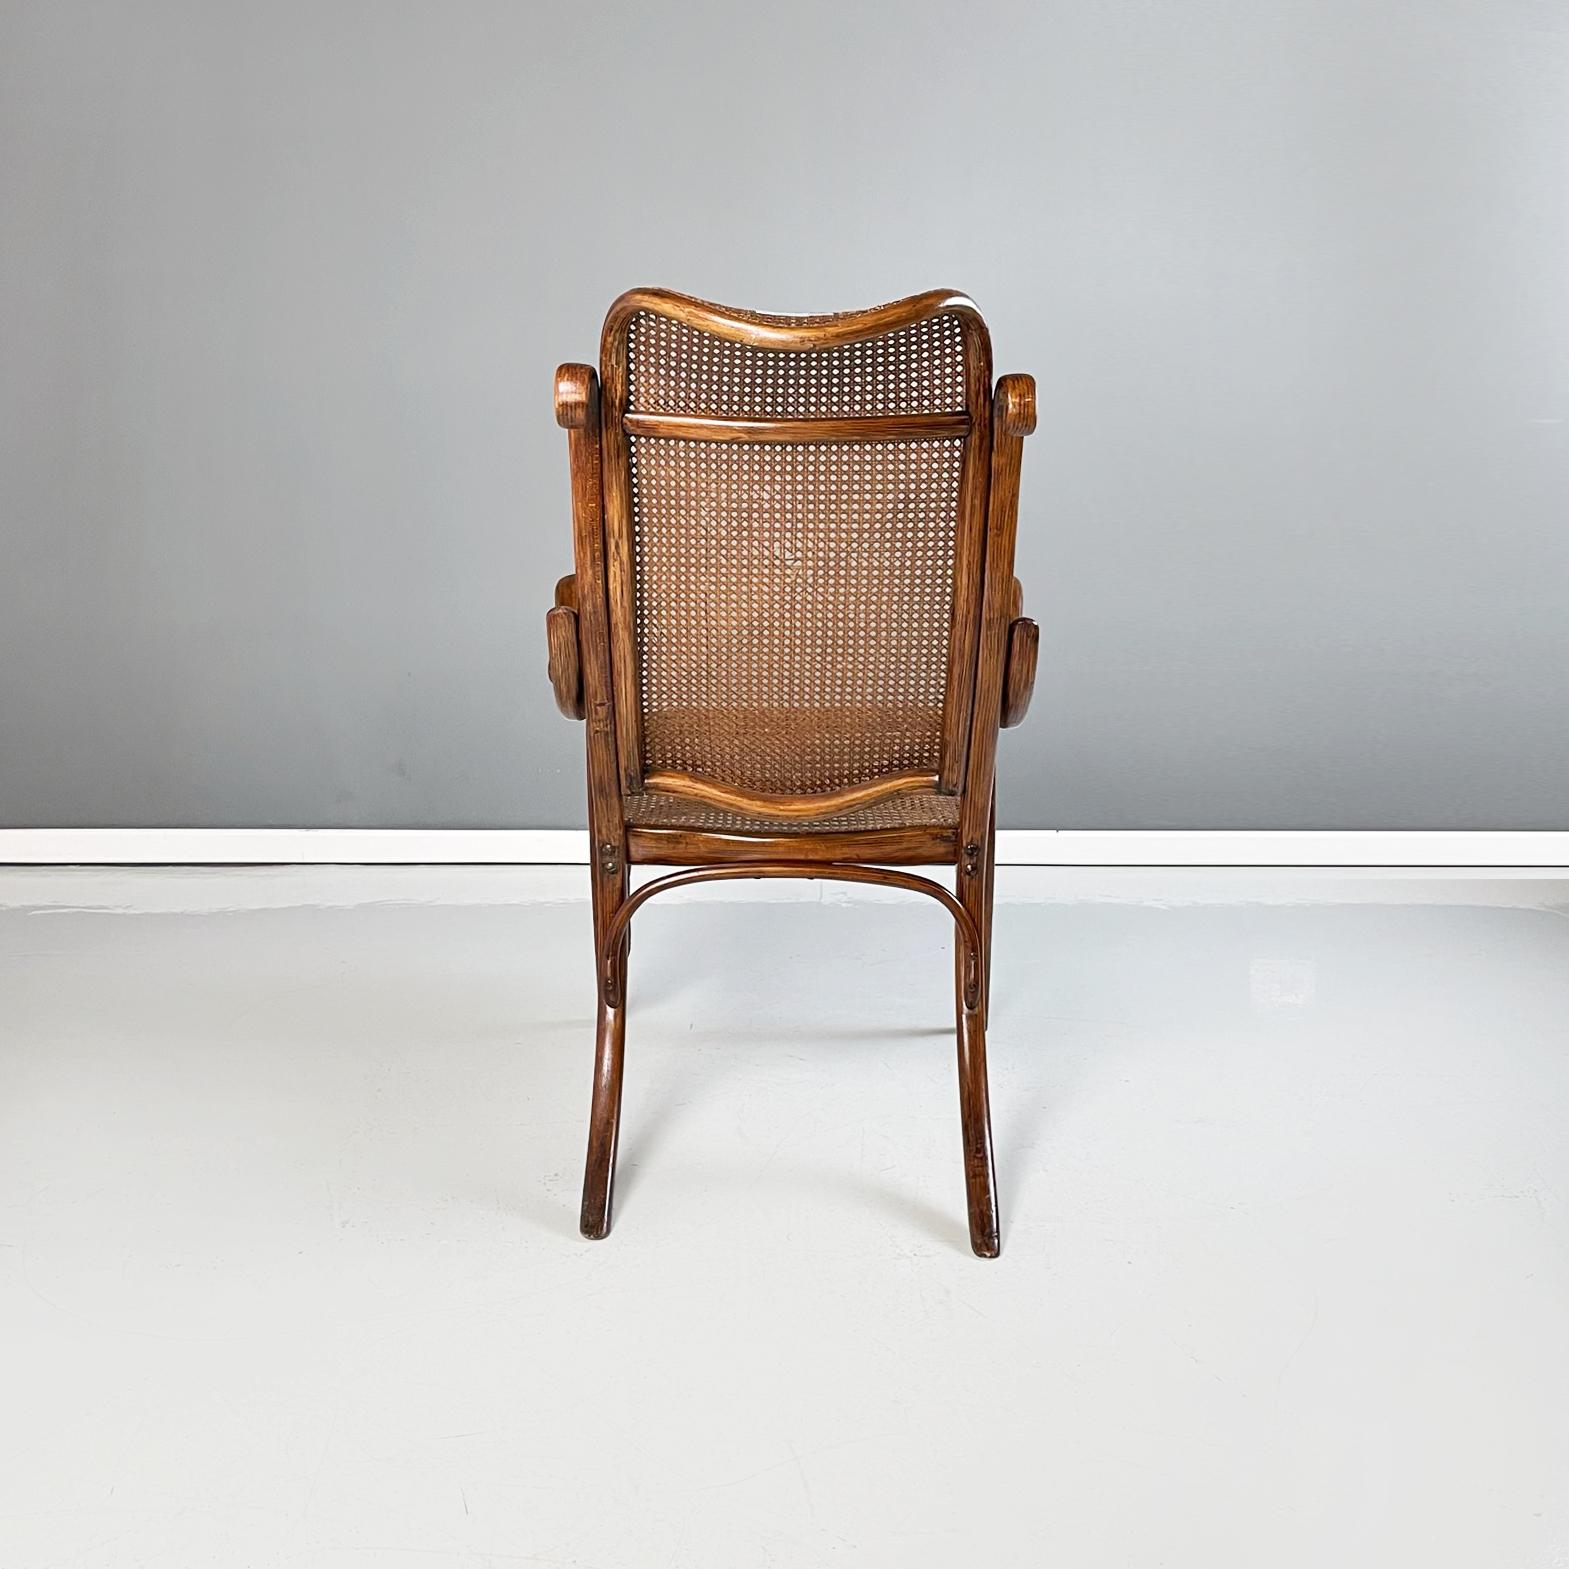 20th Century Austrian Armchair with Dark Brown Straw and Solid Wood in Thonet Style, 1900s For Sale